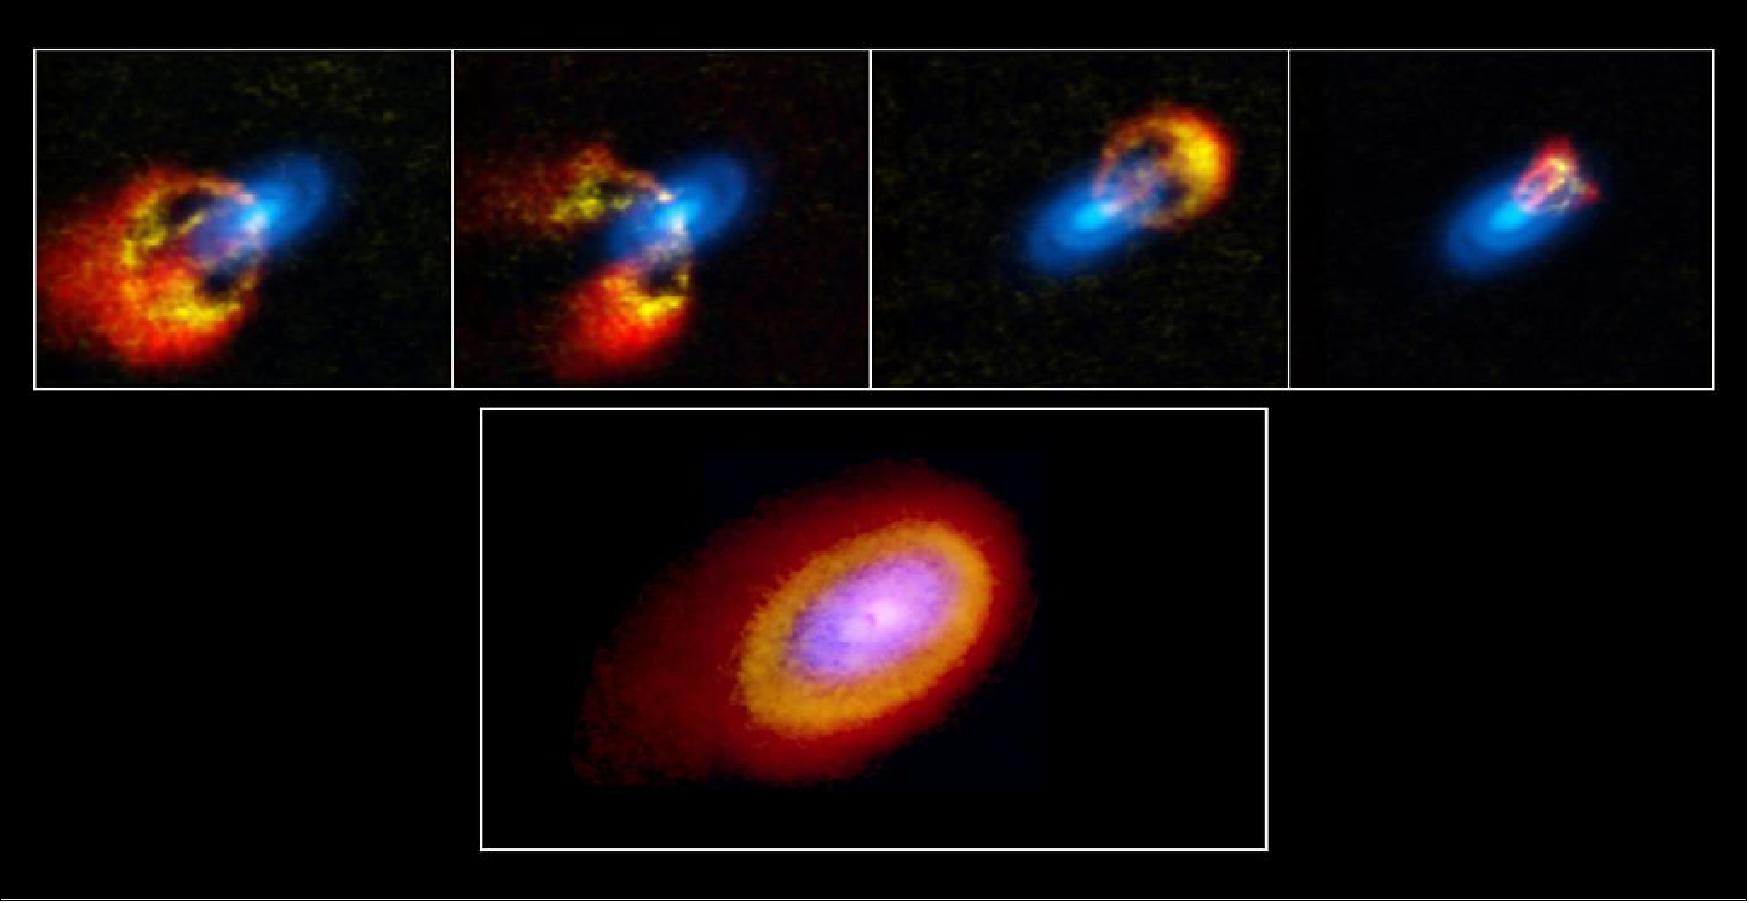 Figure 20: New observations of young stellar object Elias 2-27 confirm gravitational instabilities and planet-forming disk mass as key to formation of giant planets. Using gas velocity data, scientists observing Elias 2-27 were able to directly measure the mass of the young star’s protoplanetary disk and also trace dynamical perturbations in the star system. Visible in this paneled composite are the dust continuum 0.87mm emission data (blue), along with emissions from gases C18O (yellow) and 13CO (red). [image credit: ALMA (ESO/NAOJ/NRAO)/T. Paneque-Carreño (Universidad de Chile), B. Saxton (NRAO)]